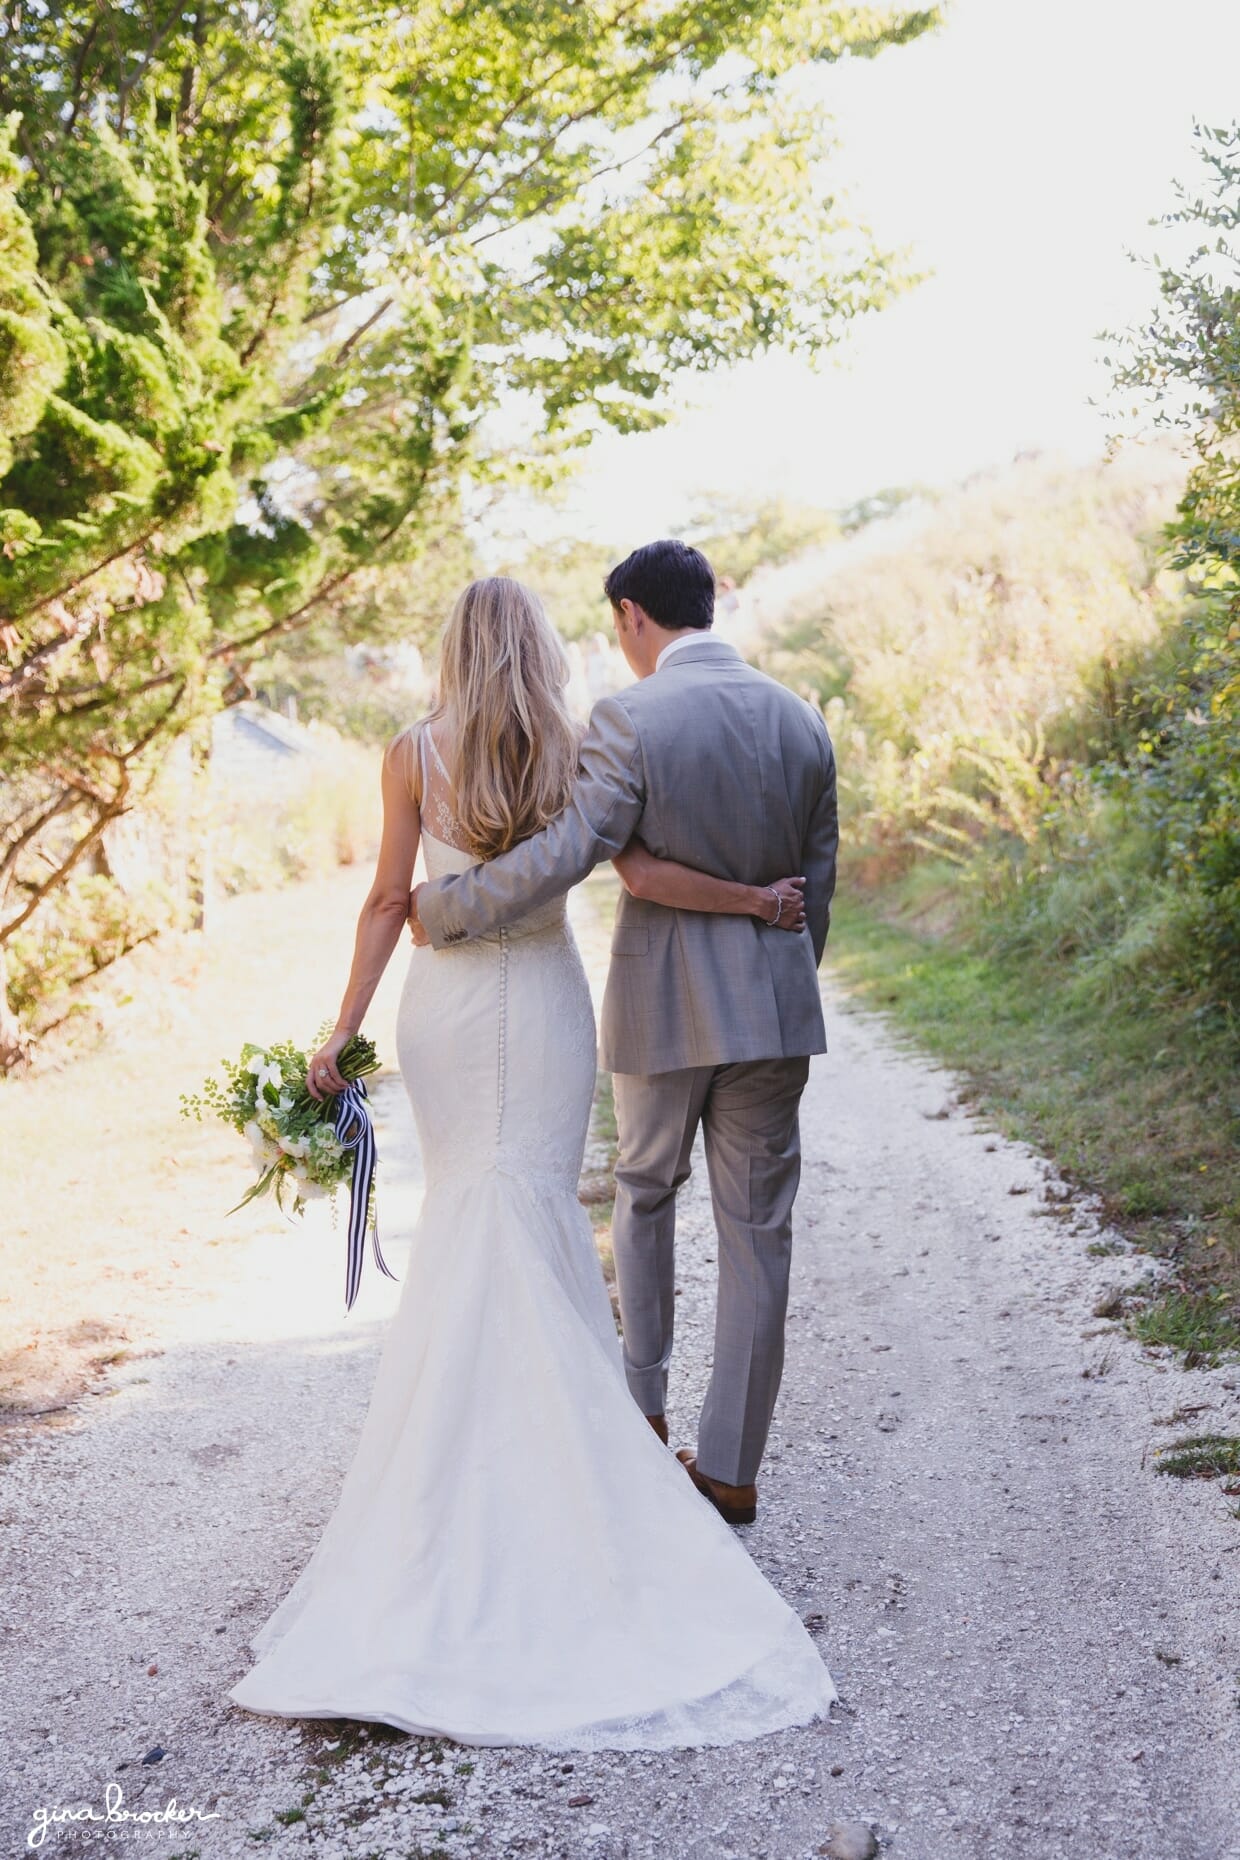 A beautiful and romantic portrait of a bride and groom walking down a path together before their Nantucket wedding at the Westmoor Club